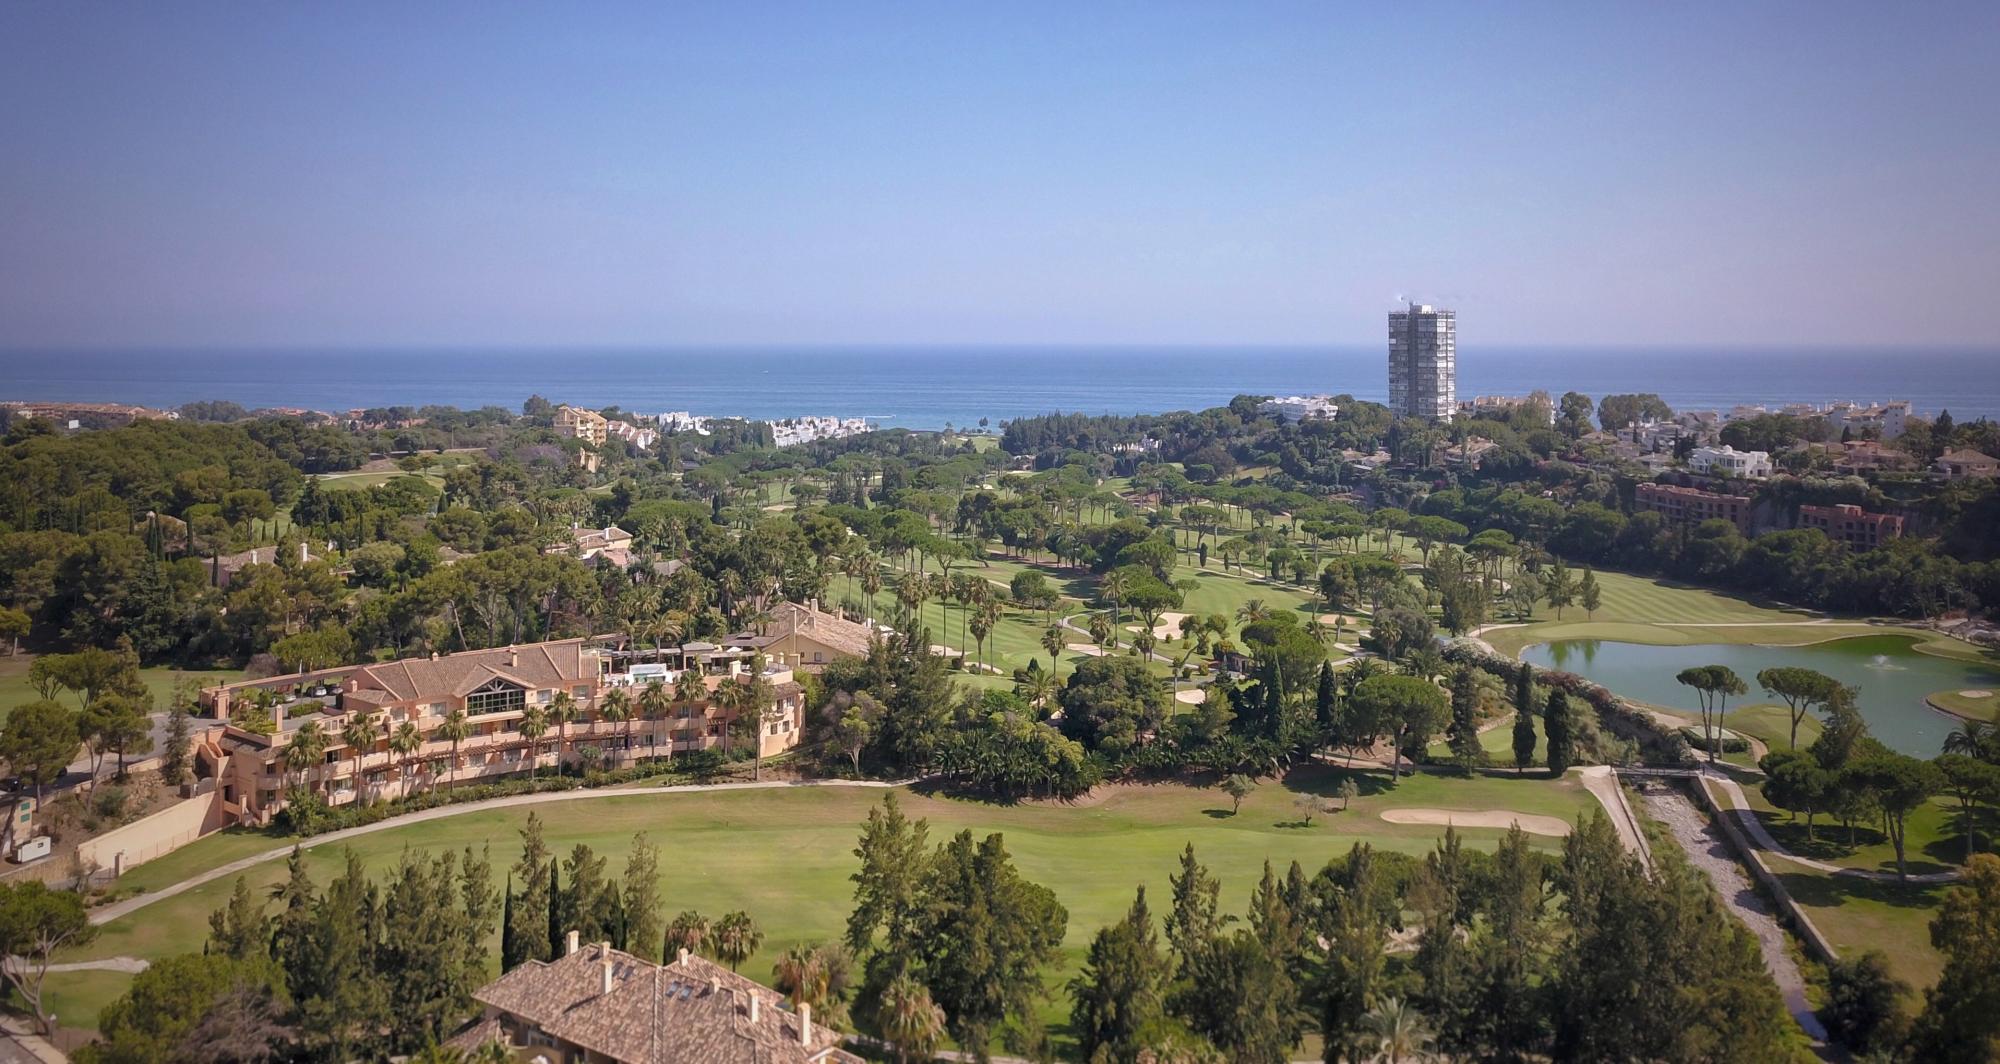 The Rio Real Golf Hotels lovely hotel in dramatic Costa Del Sol.